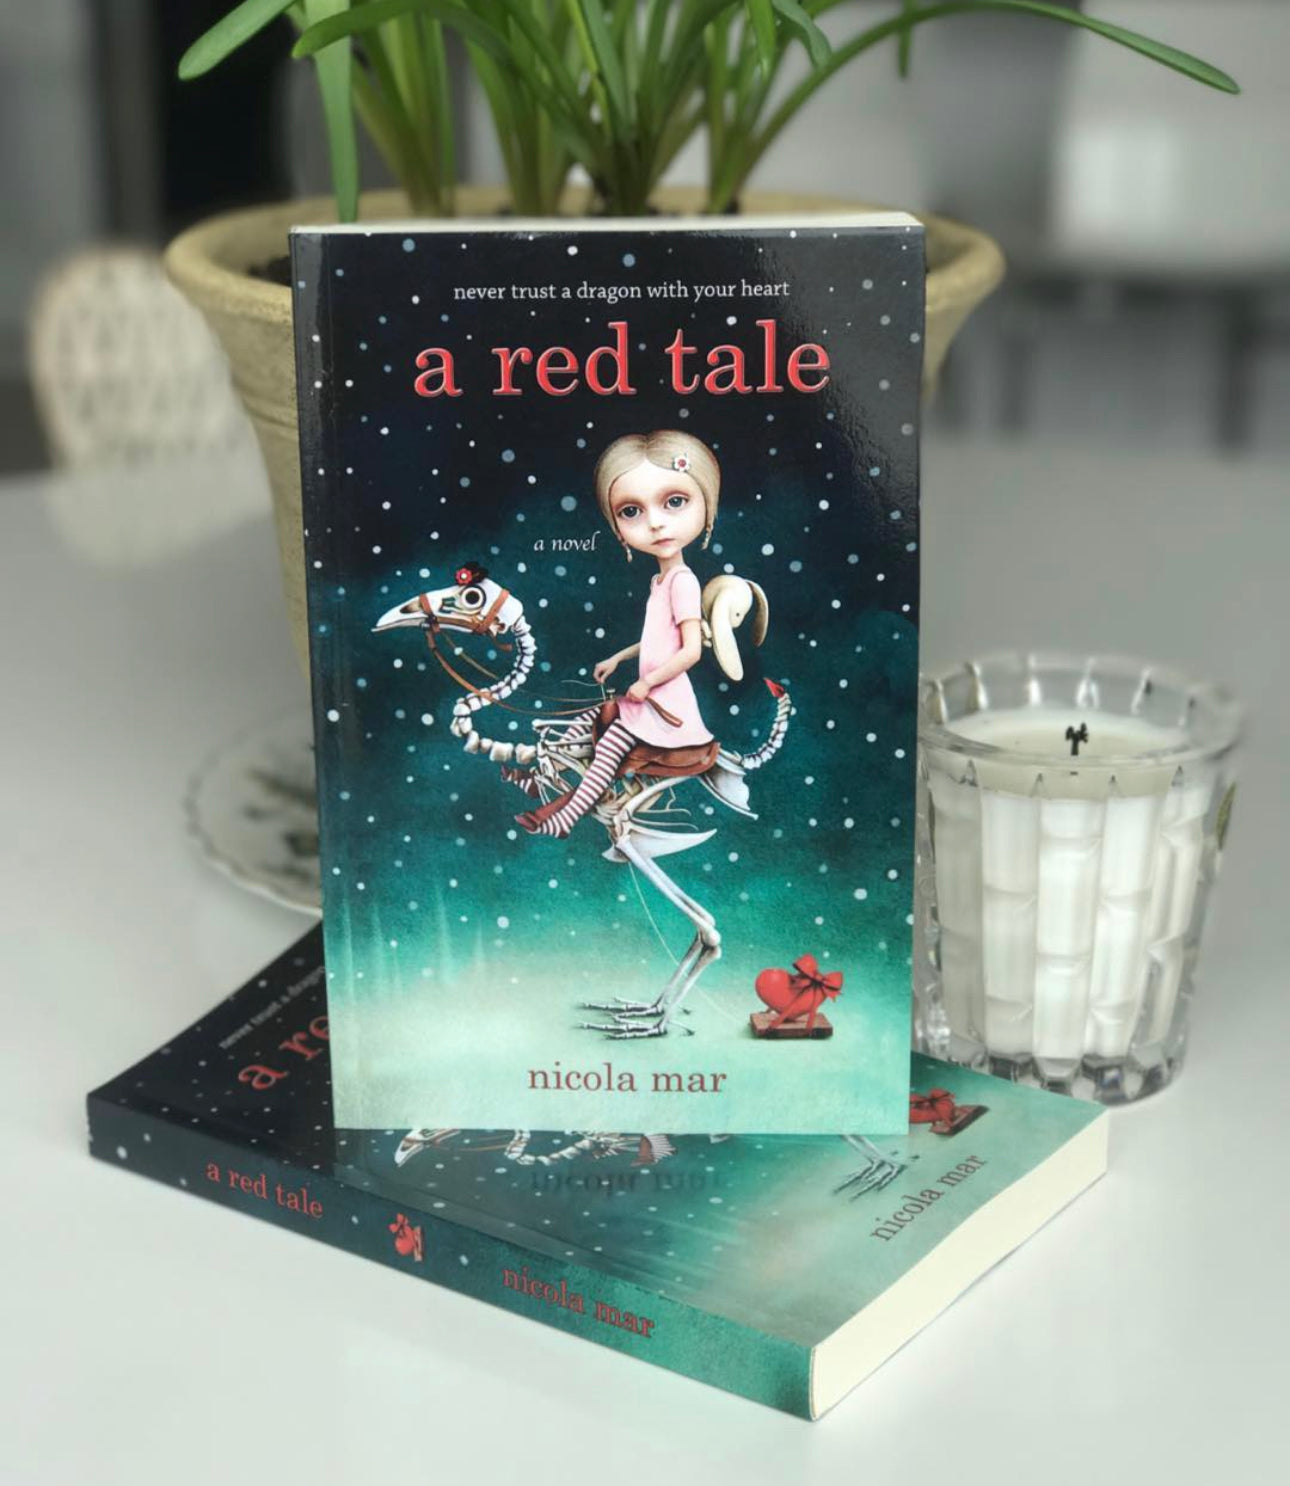 A Red Tale book by Nicola Mar